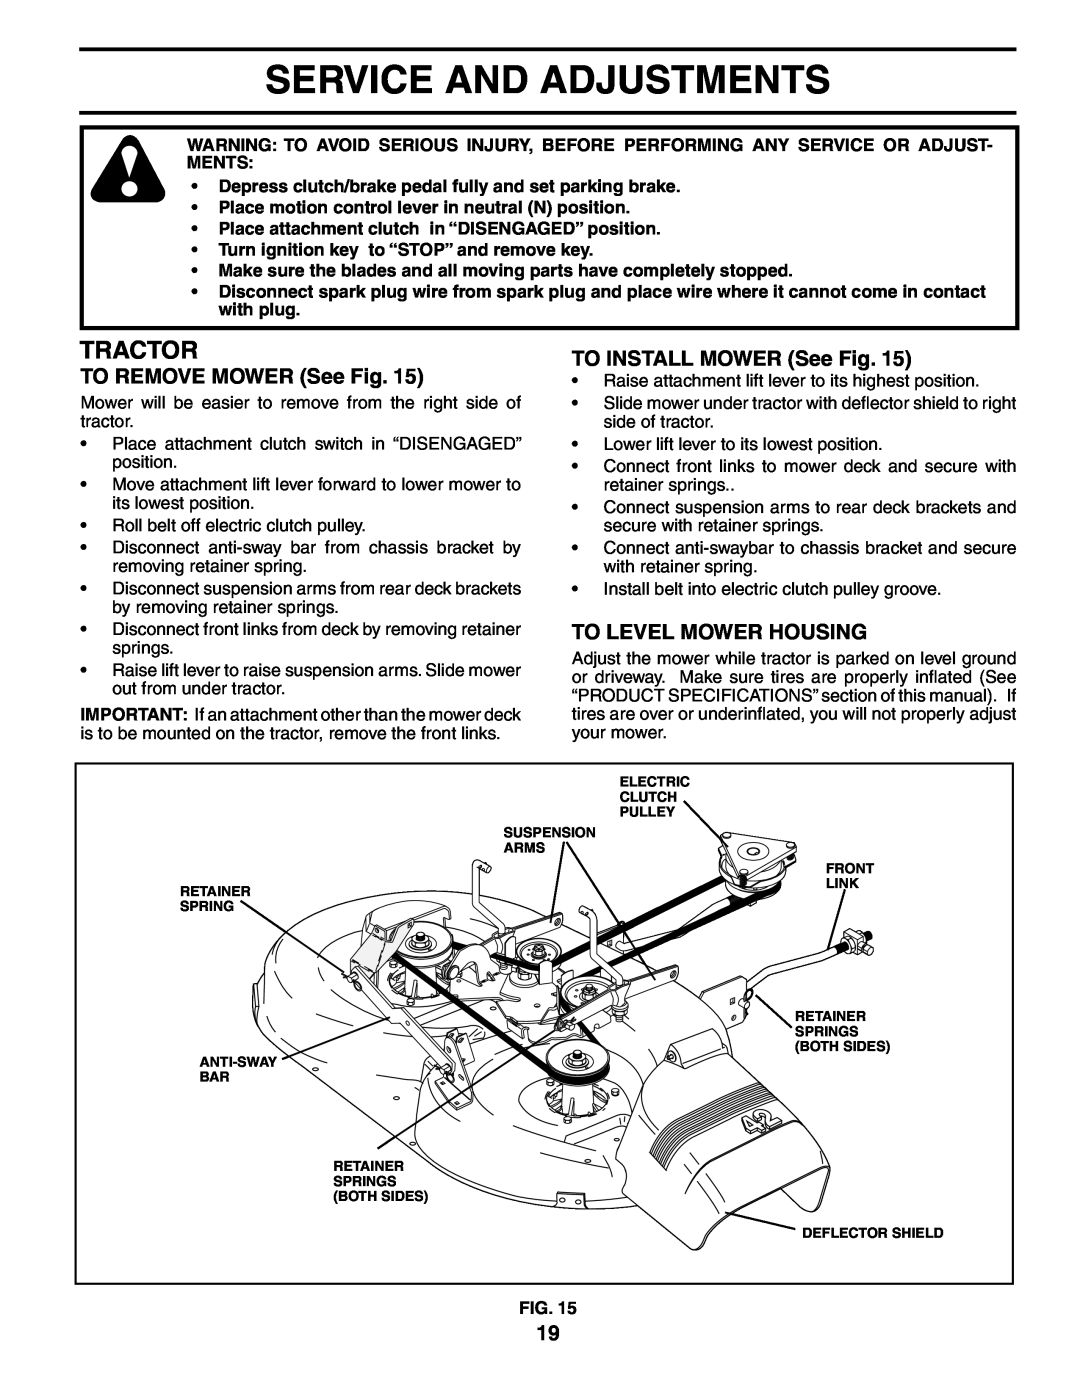 Husqvarna LTH1542 Service And Adjustments, TO REMOVE MOWER See Fig, TO INSTALL MOWER See Fig, To Level Mower Housing 